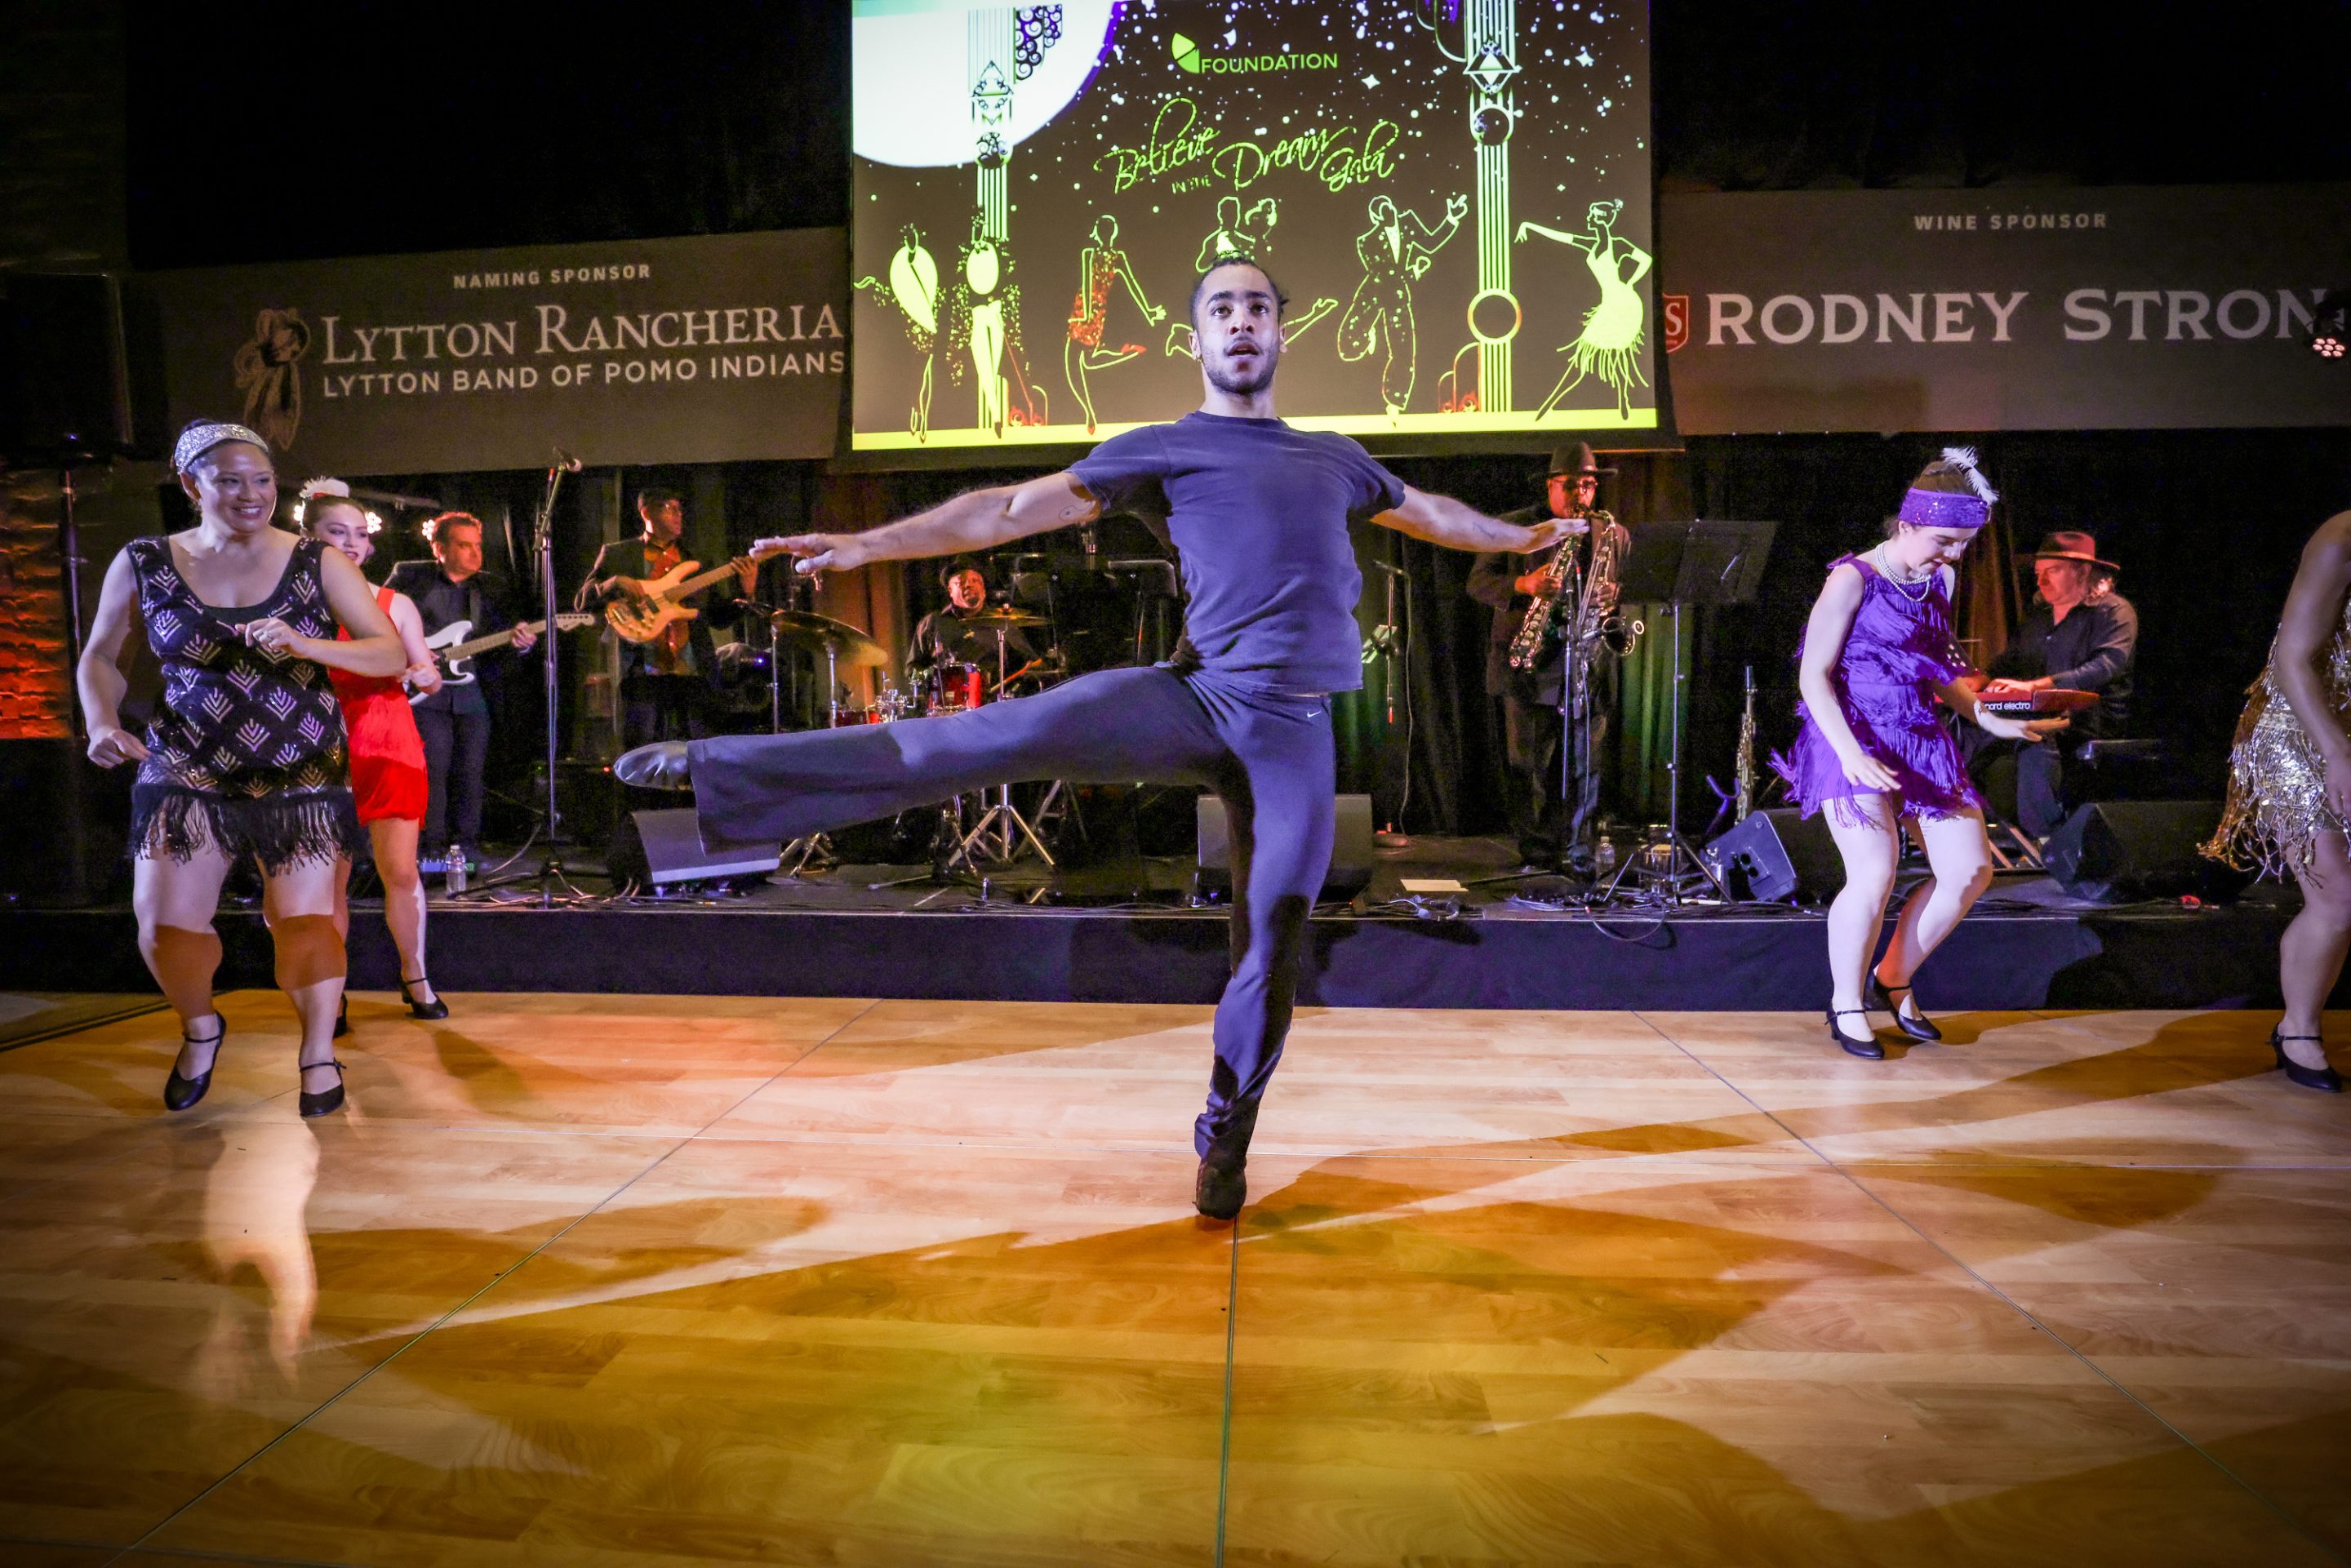 A group of people dancing on a stage at The LIME Foundation of Santa Rosa, a Sonoma County non-profit organization.